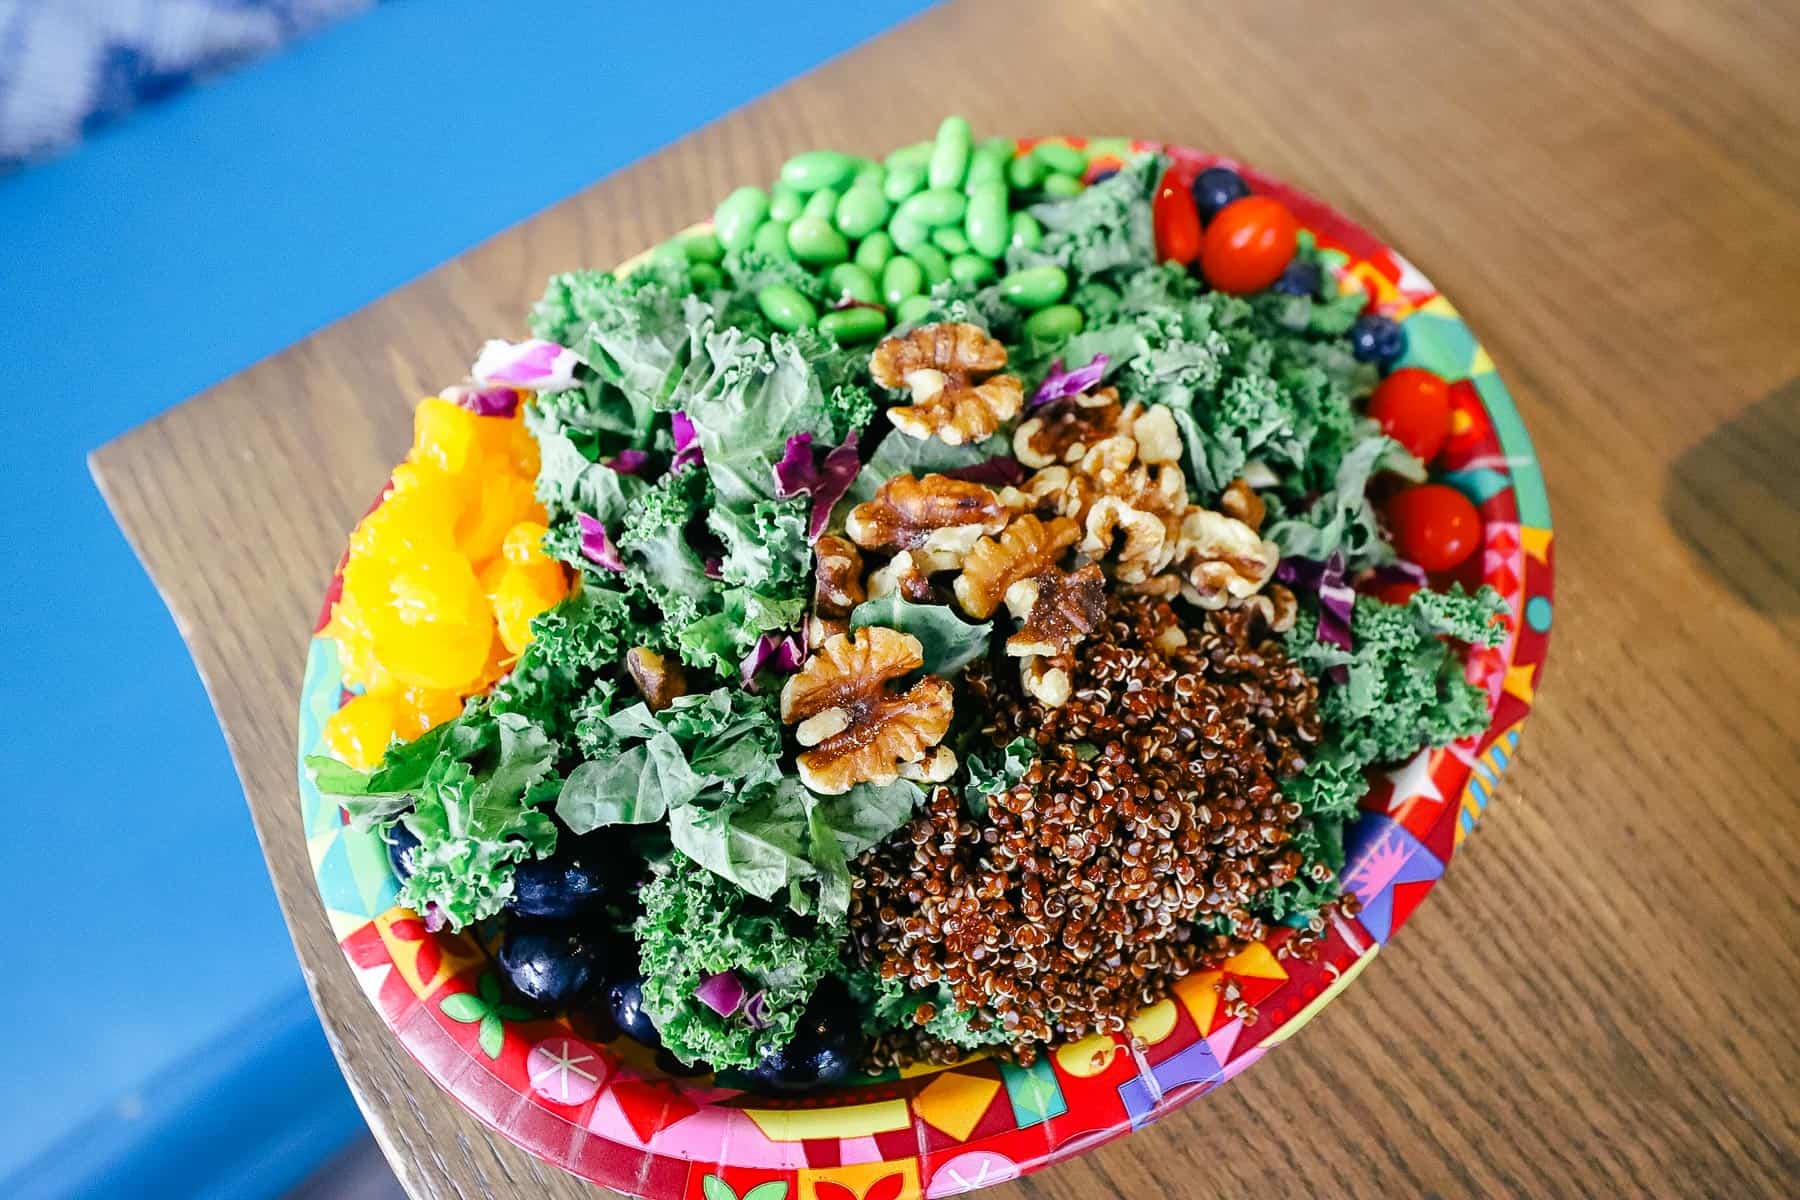 A hearty super salad with kale, pecans, quinoa, grapes, blueberries and more from Capt. Cooks. 